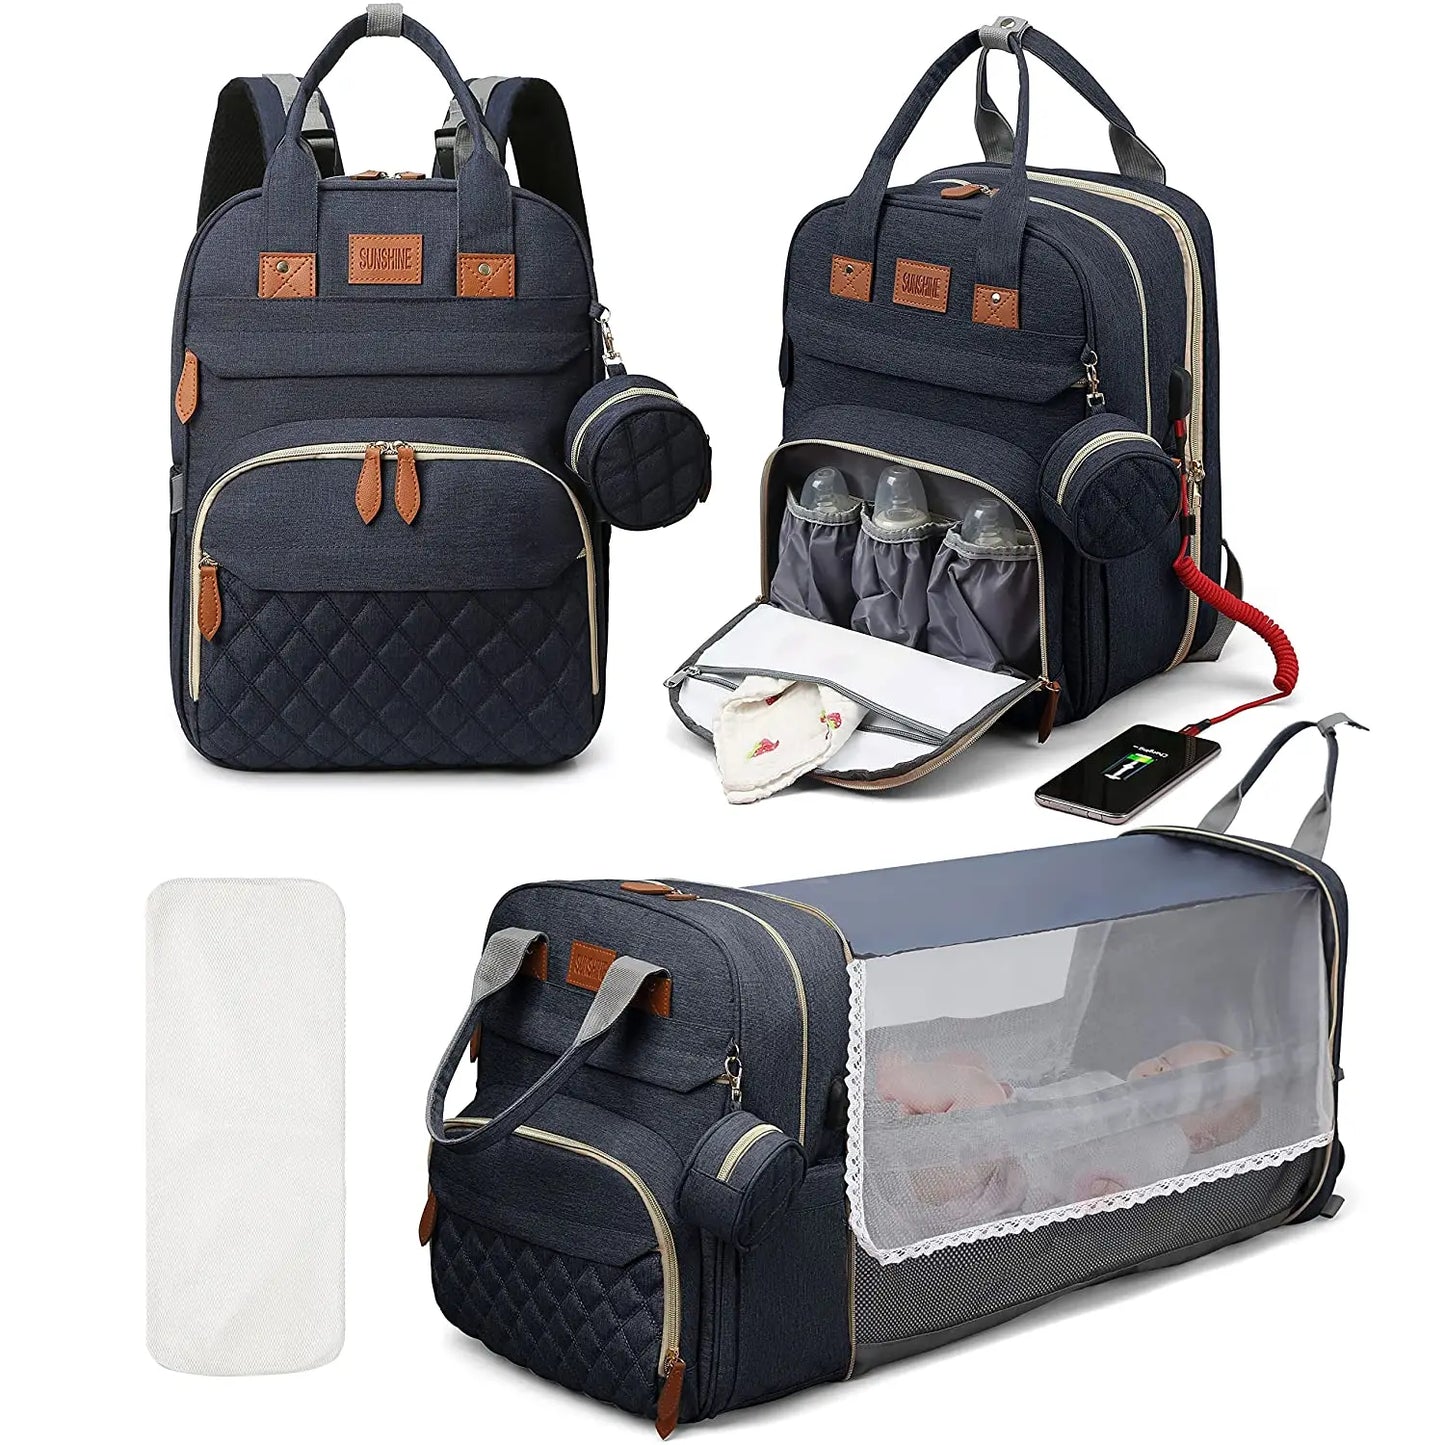 Fashion-Forward Portable Folding Crib Diaper Bag: The Ultimate Multi-Function Baby Backpack!